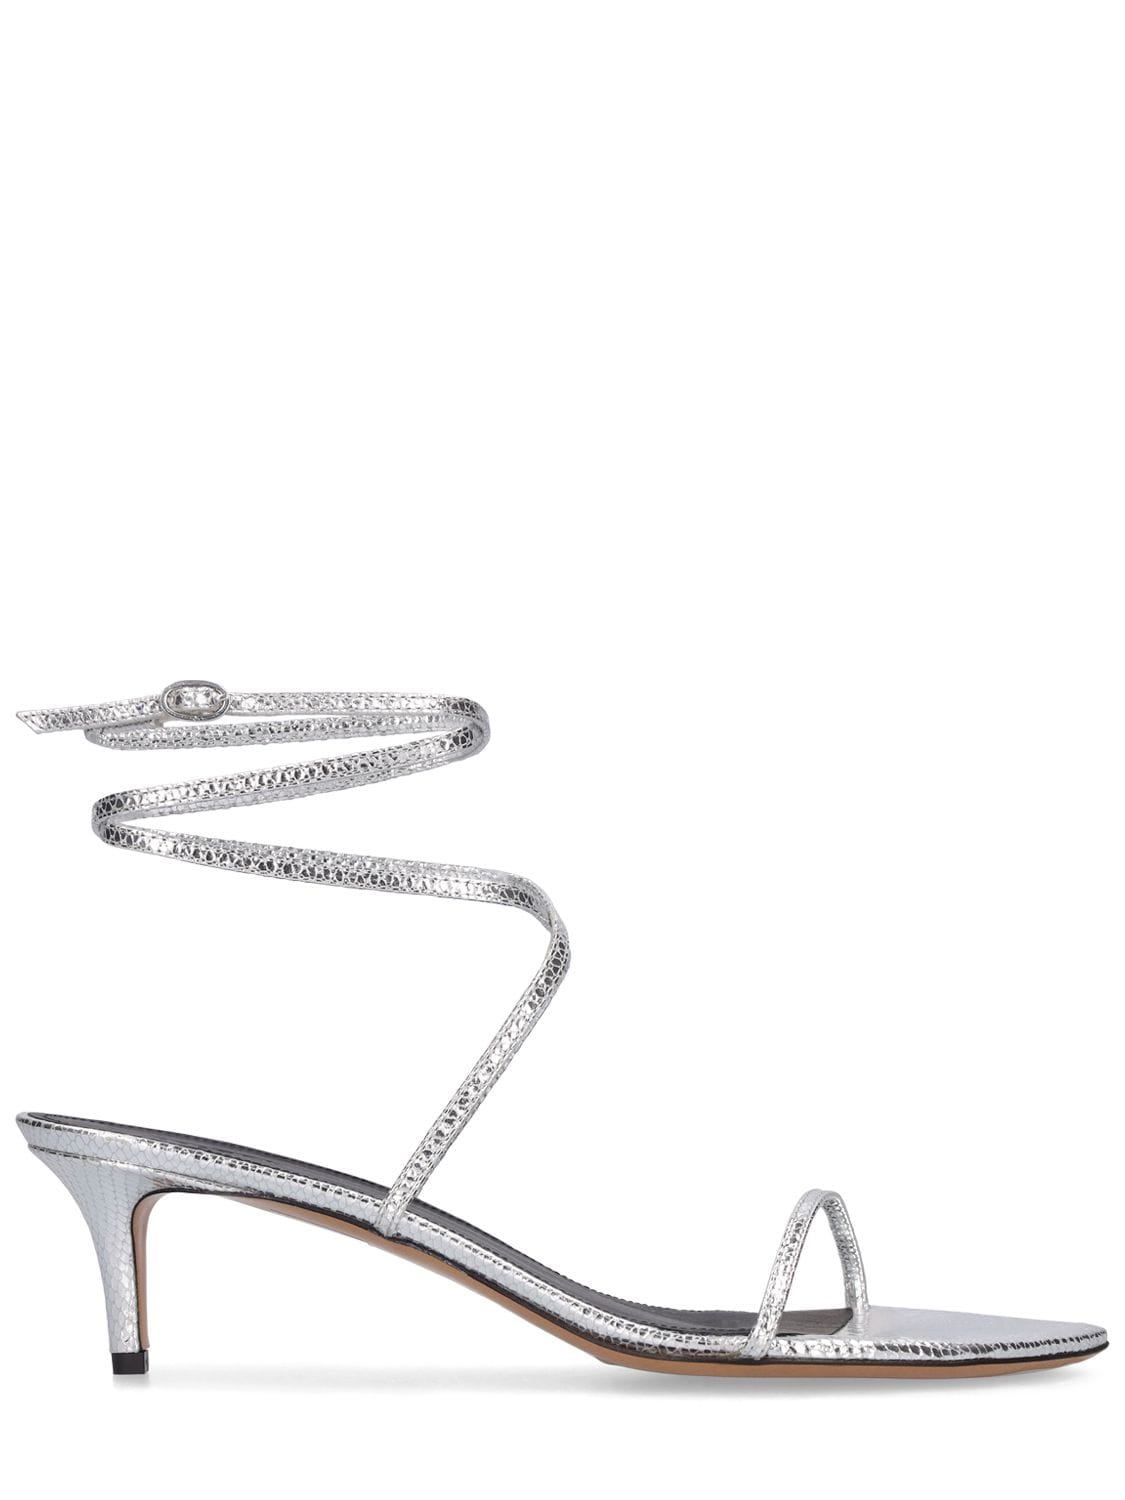 Isabel Marant Aridee Sandals In Silver